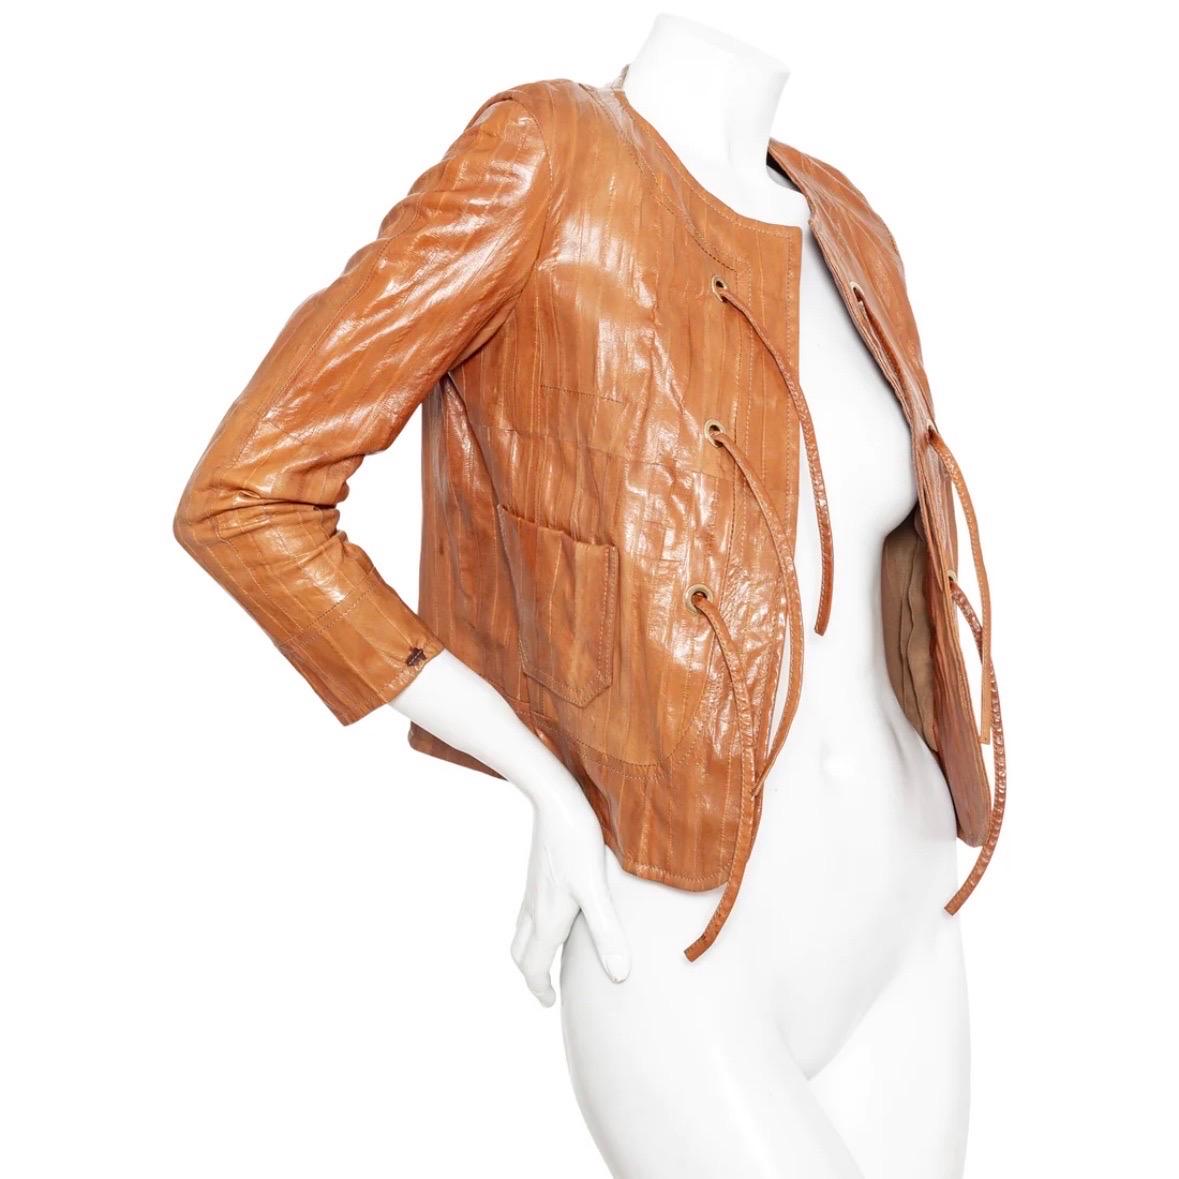 Christian Dior Brown Eel Leather Grommet Jacket

Vintage; circa early 2000s
John Galliano for Christian Dior
Light Brown
Eel leather panels
Collarless, round neckline
Open front with self-tie straps
Gold-tone grommets
Front patch pockets
3/4